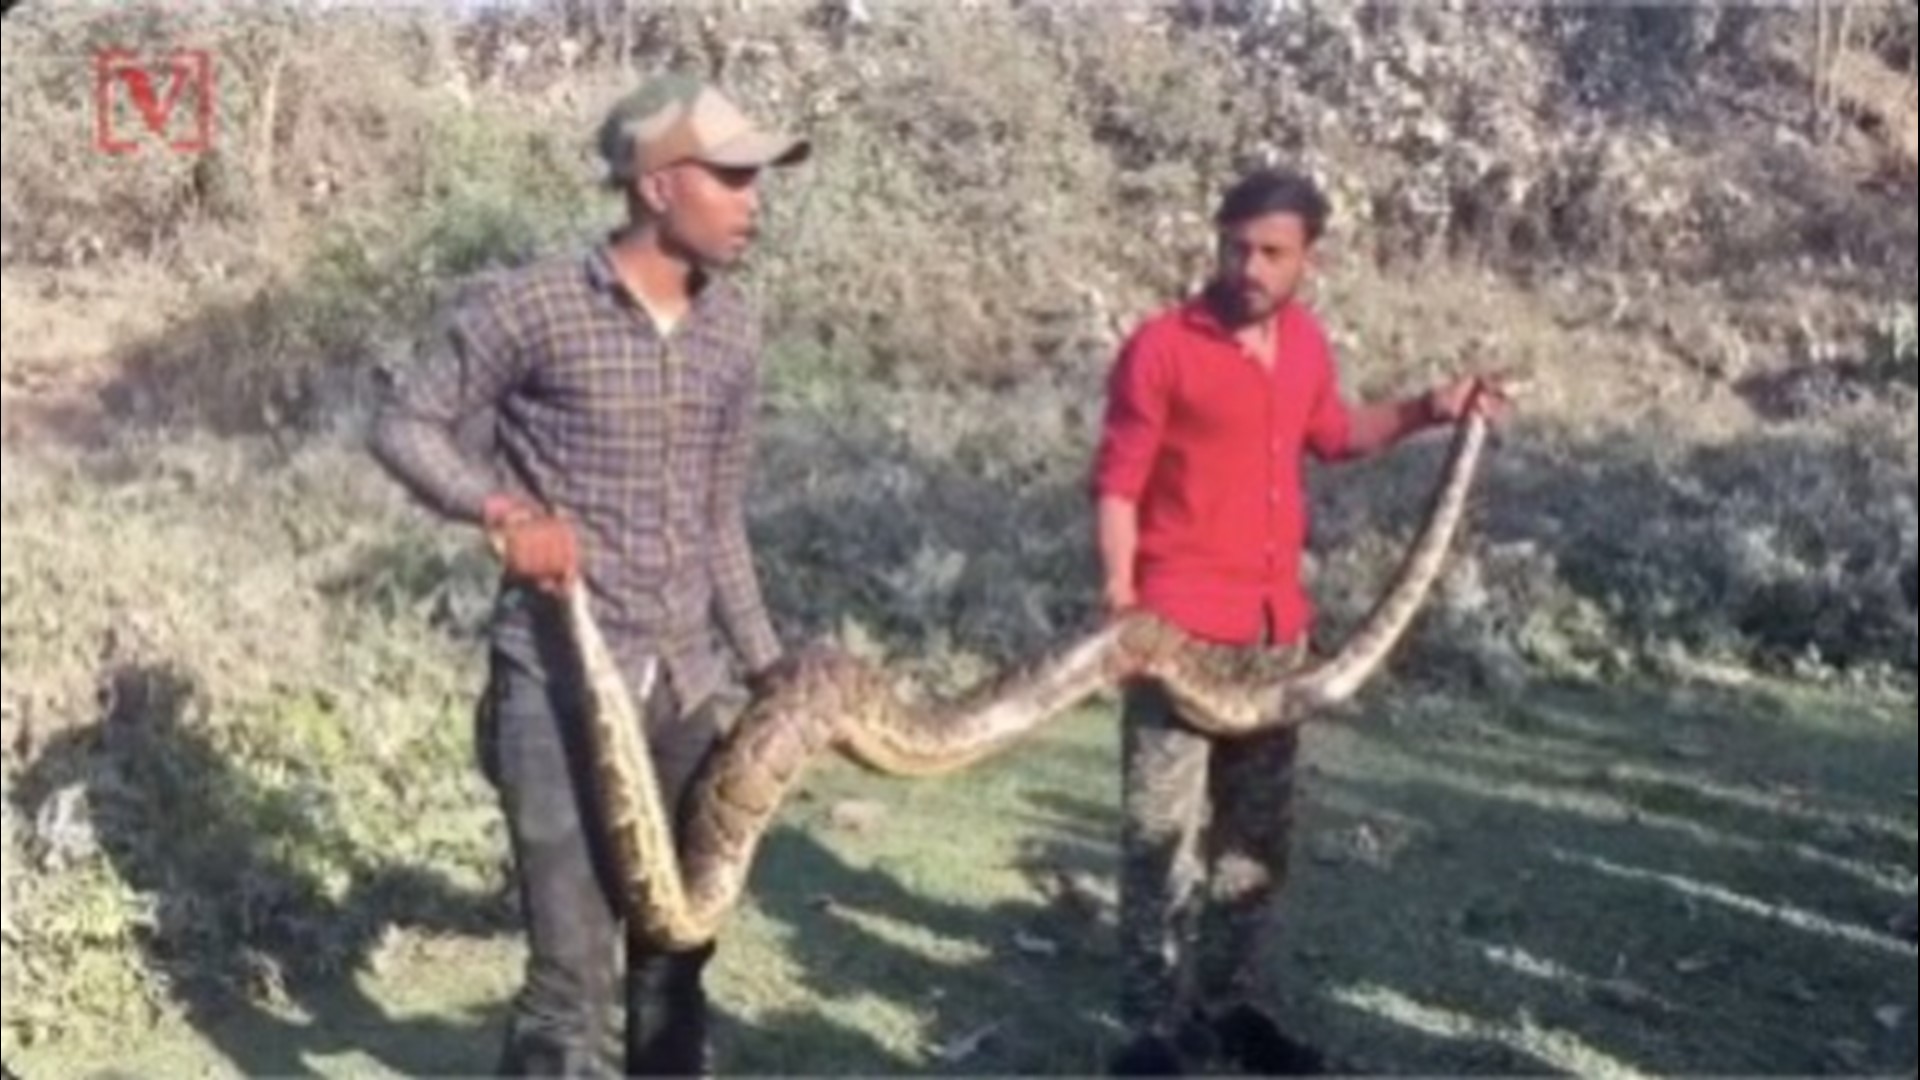 A giant Burmese python was rescued by Eastern India forest officials after getting stuck in an industrial waste pipe. Veuer's Mercer Morrison has the story.